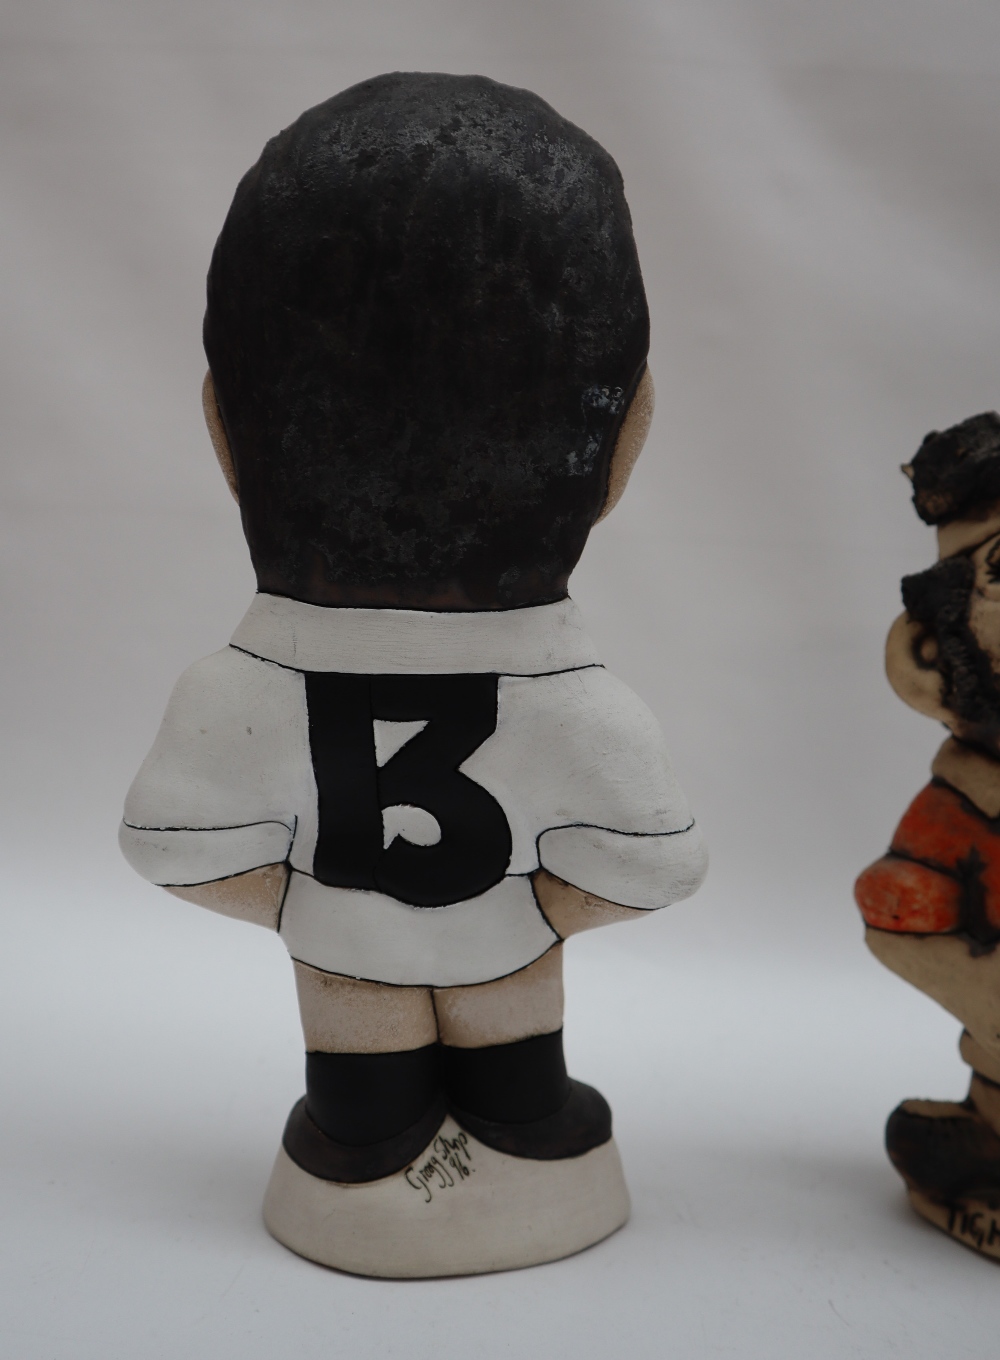 A John Hughes pottery Grogg of Will Carling in England Kit, No 13 to the reverse, signed and dated, - Image 3 of 8